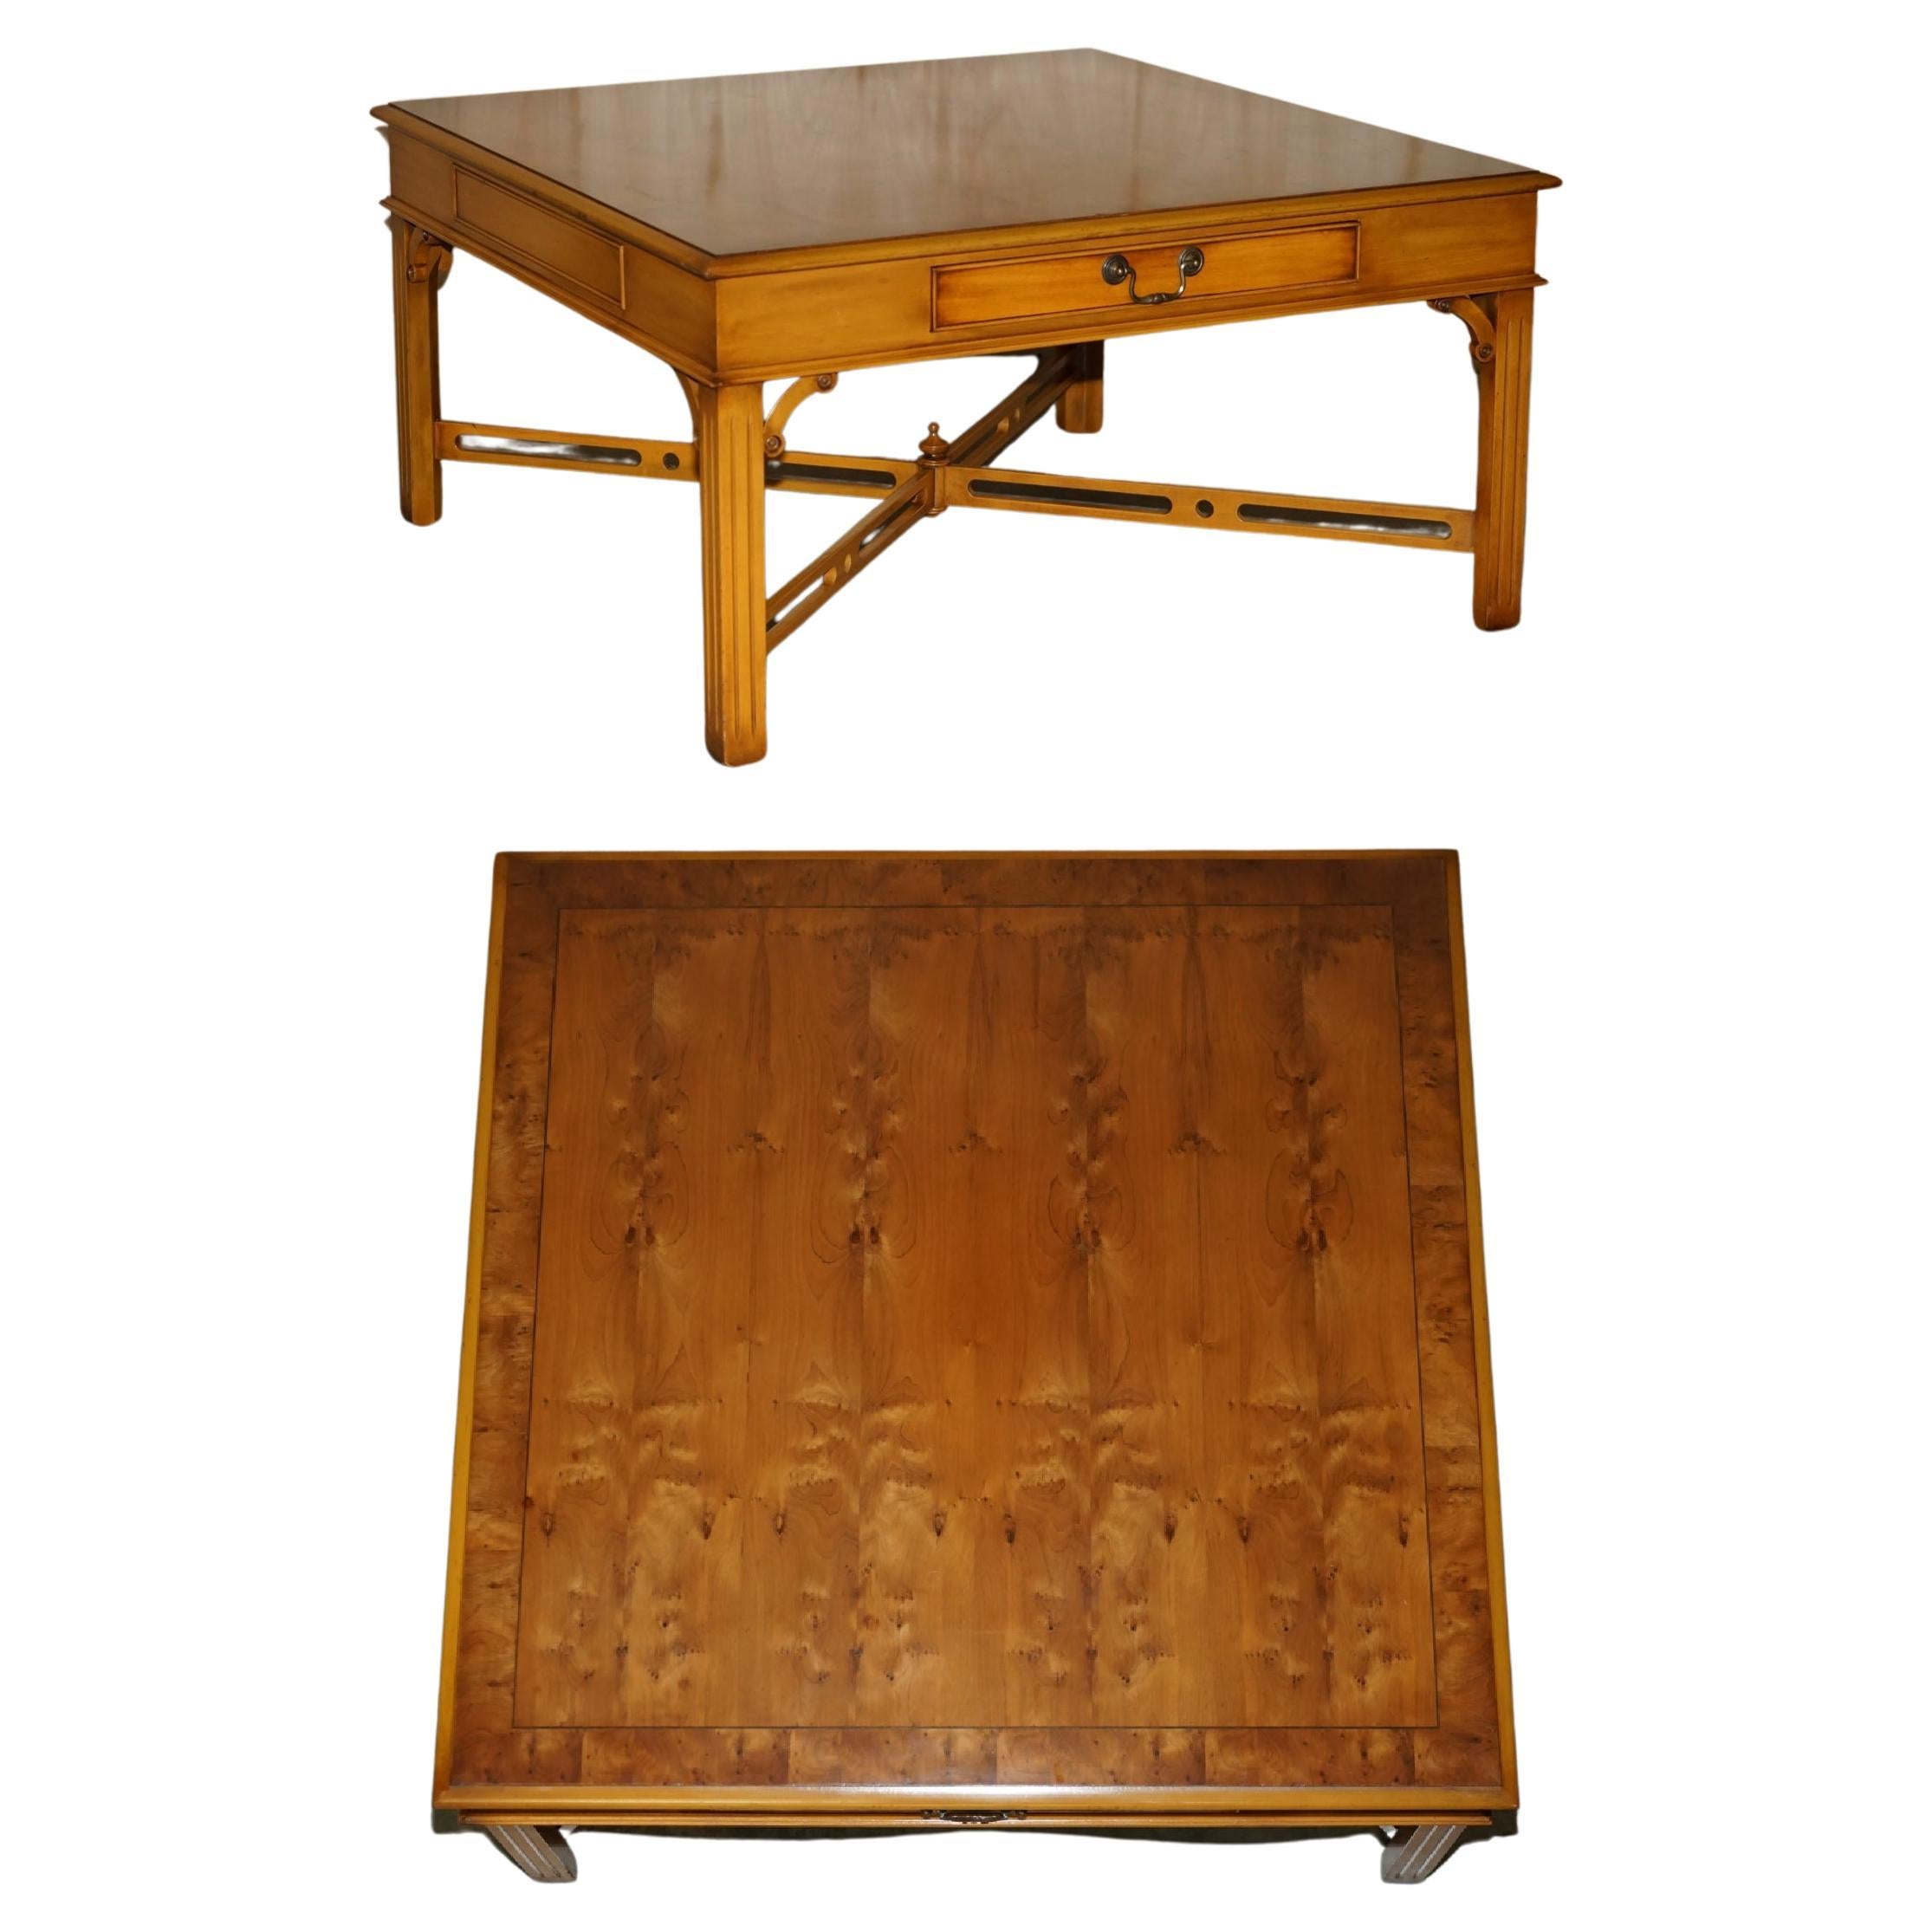 LOVELY BURR YEW WOOD TABLE COFFEE TABLE WiTH THOMAS CHIPPENDALE STRETCHES en vente